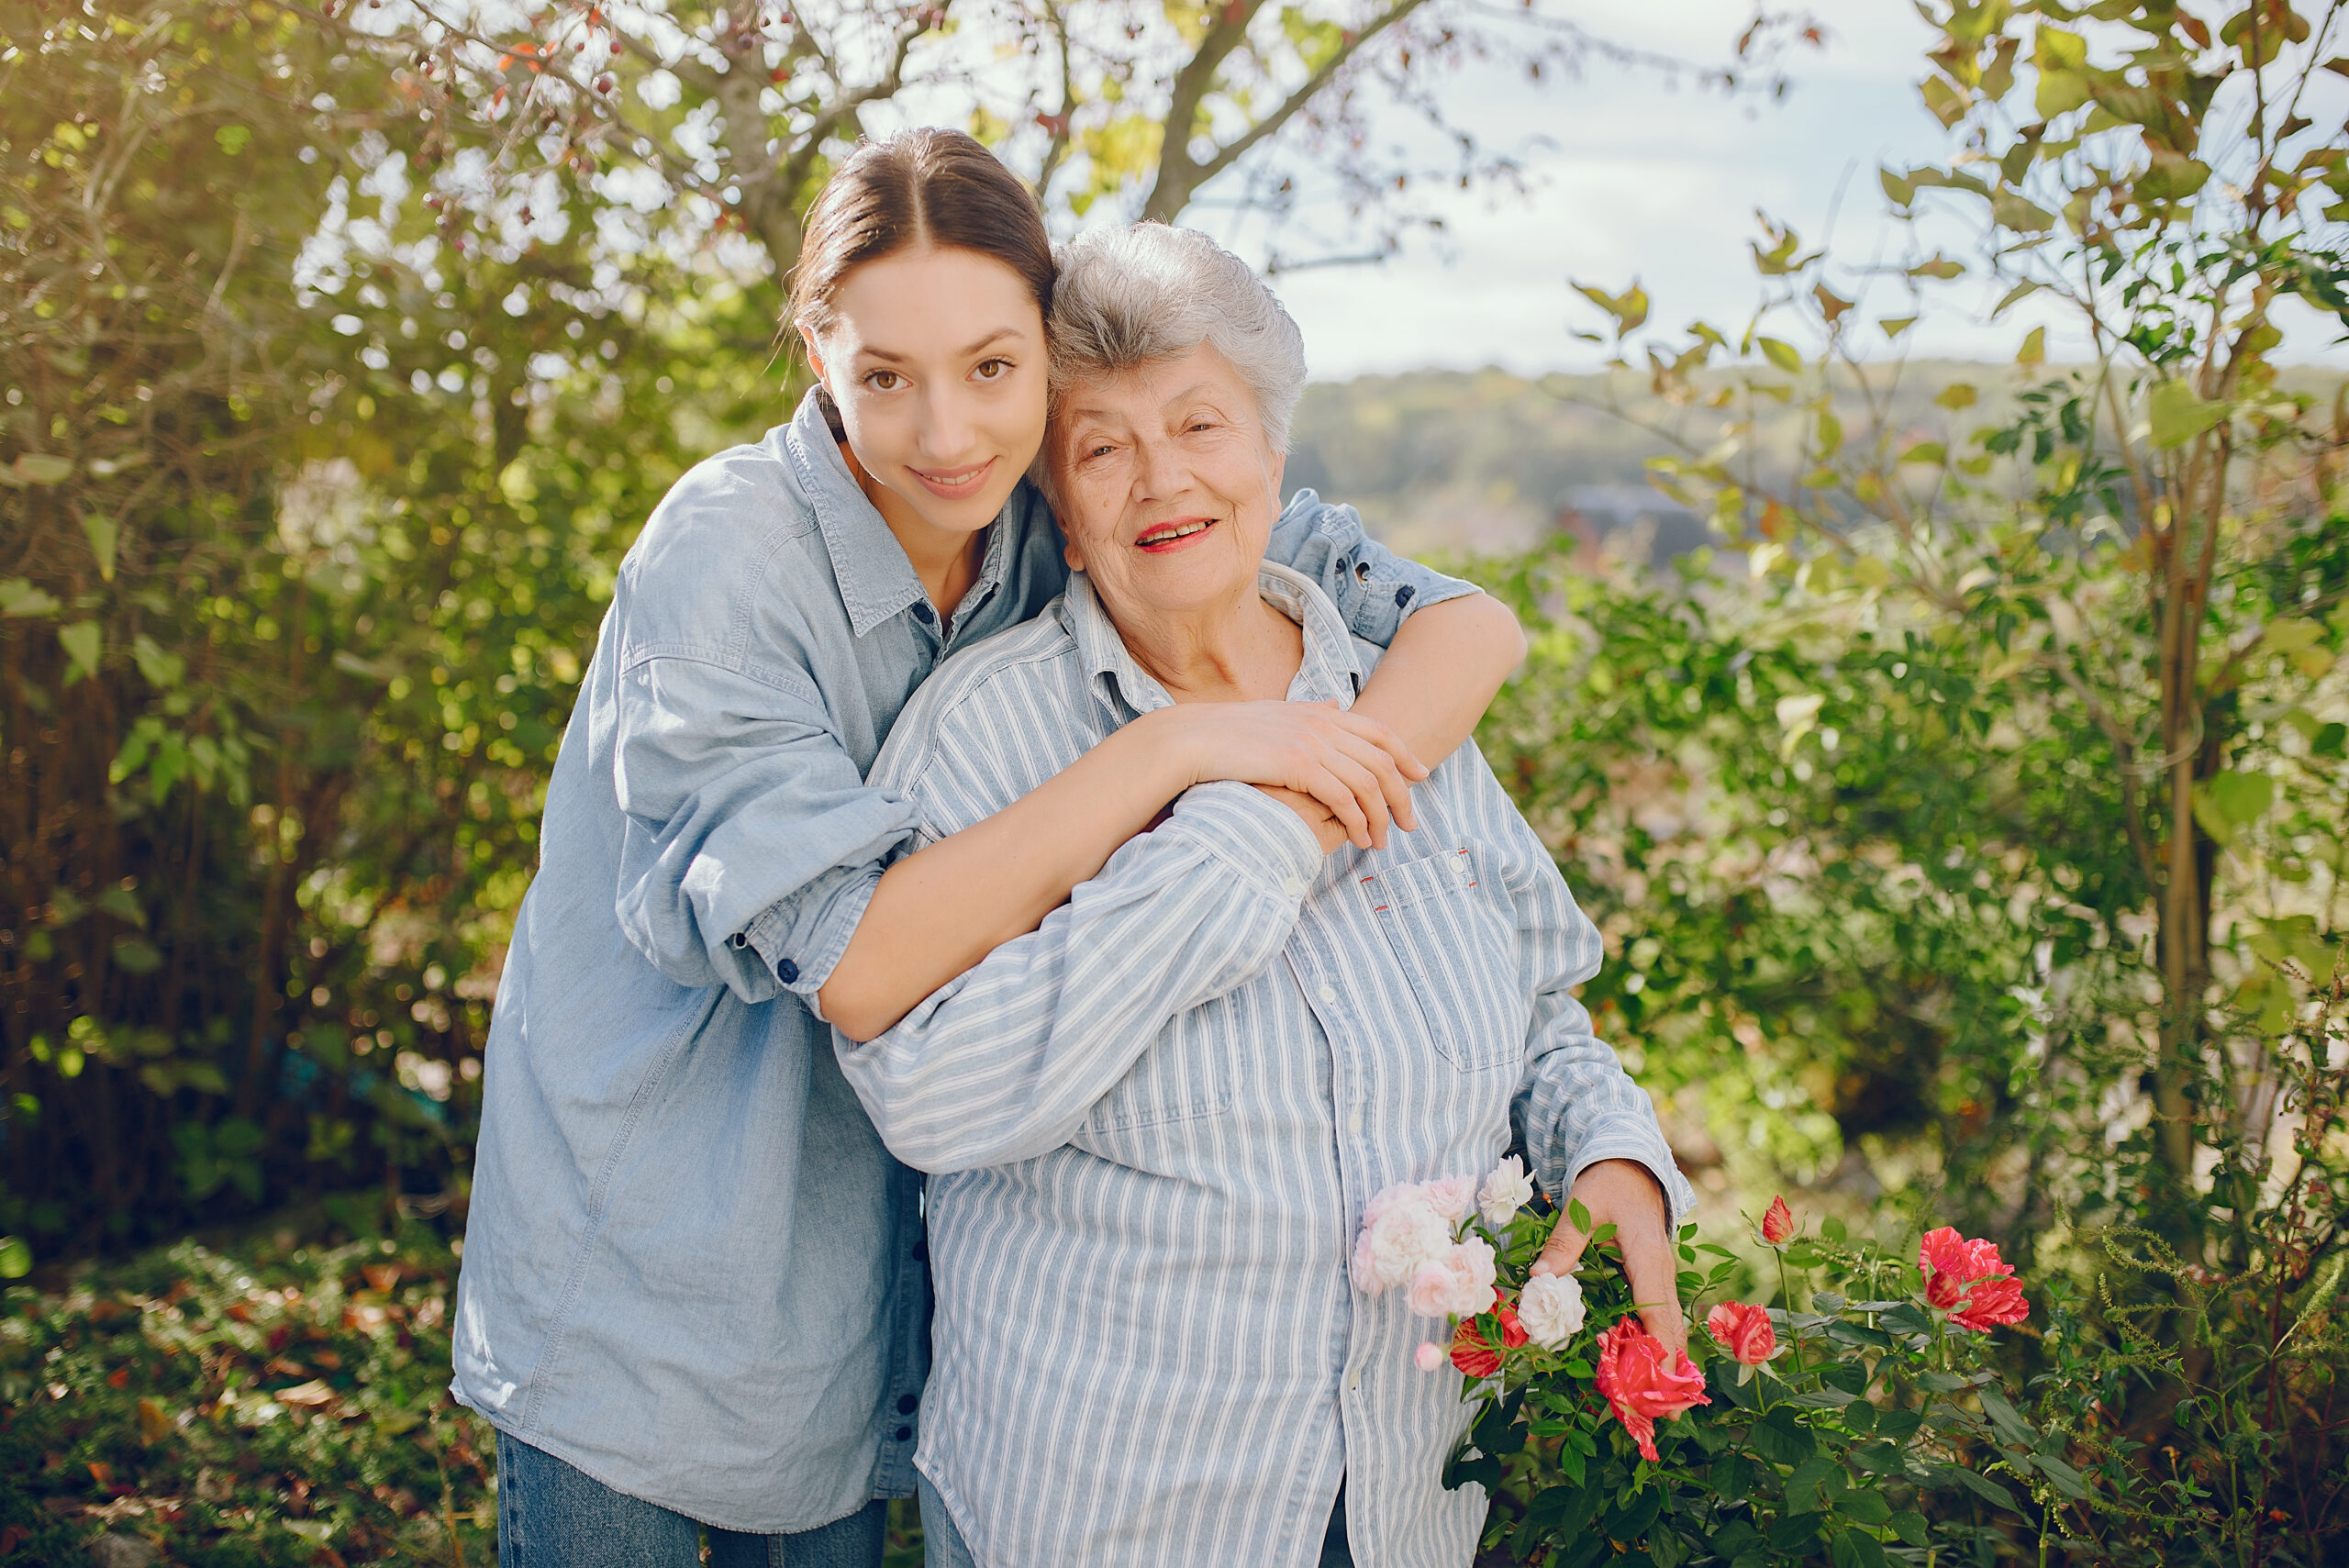 Assisted Living vs. In-Home Care: Which is Better for You?